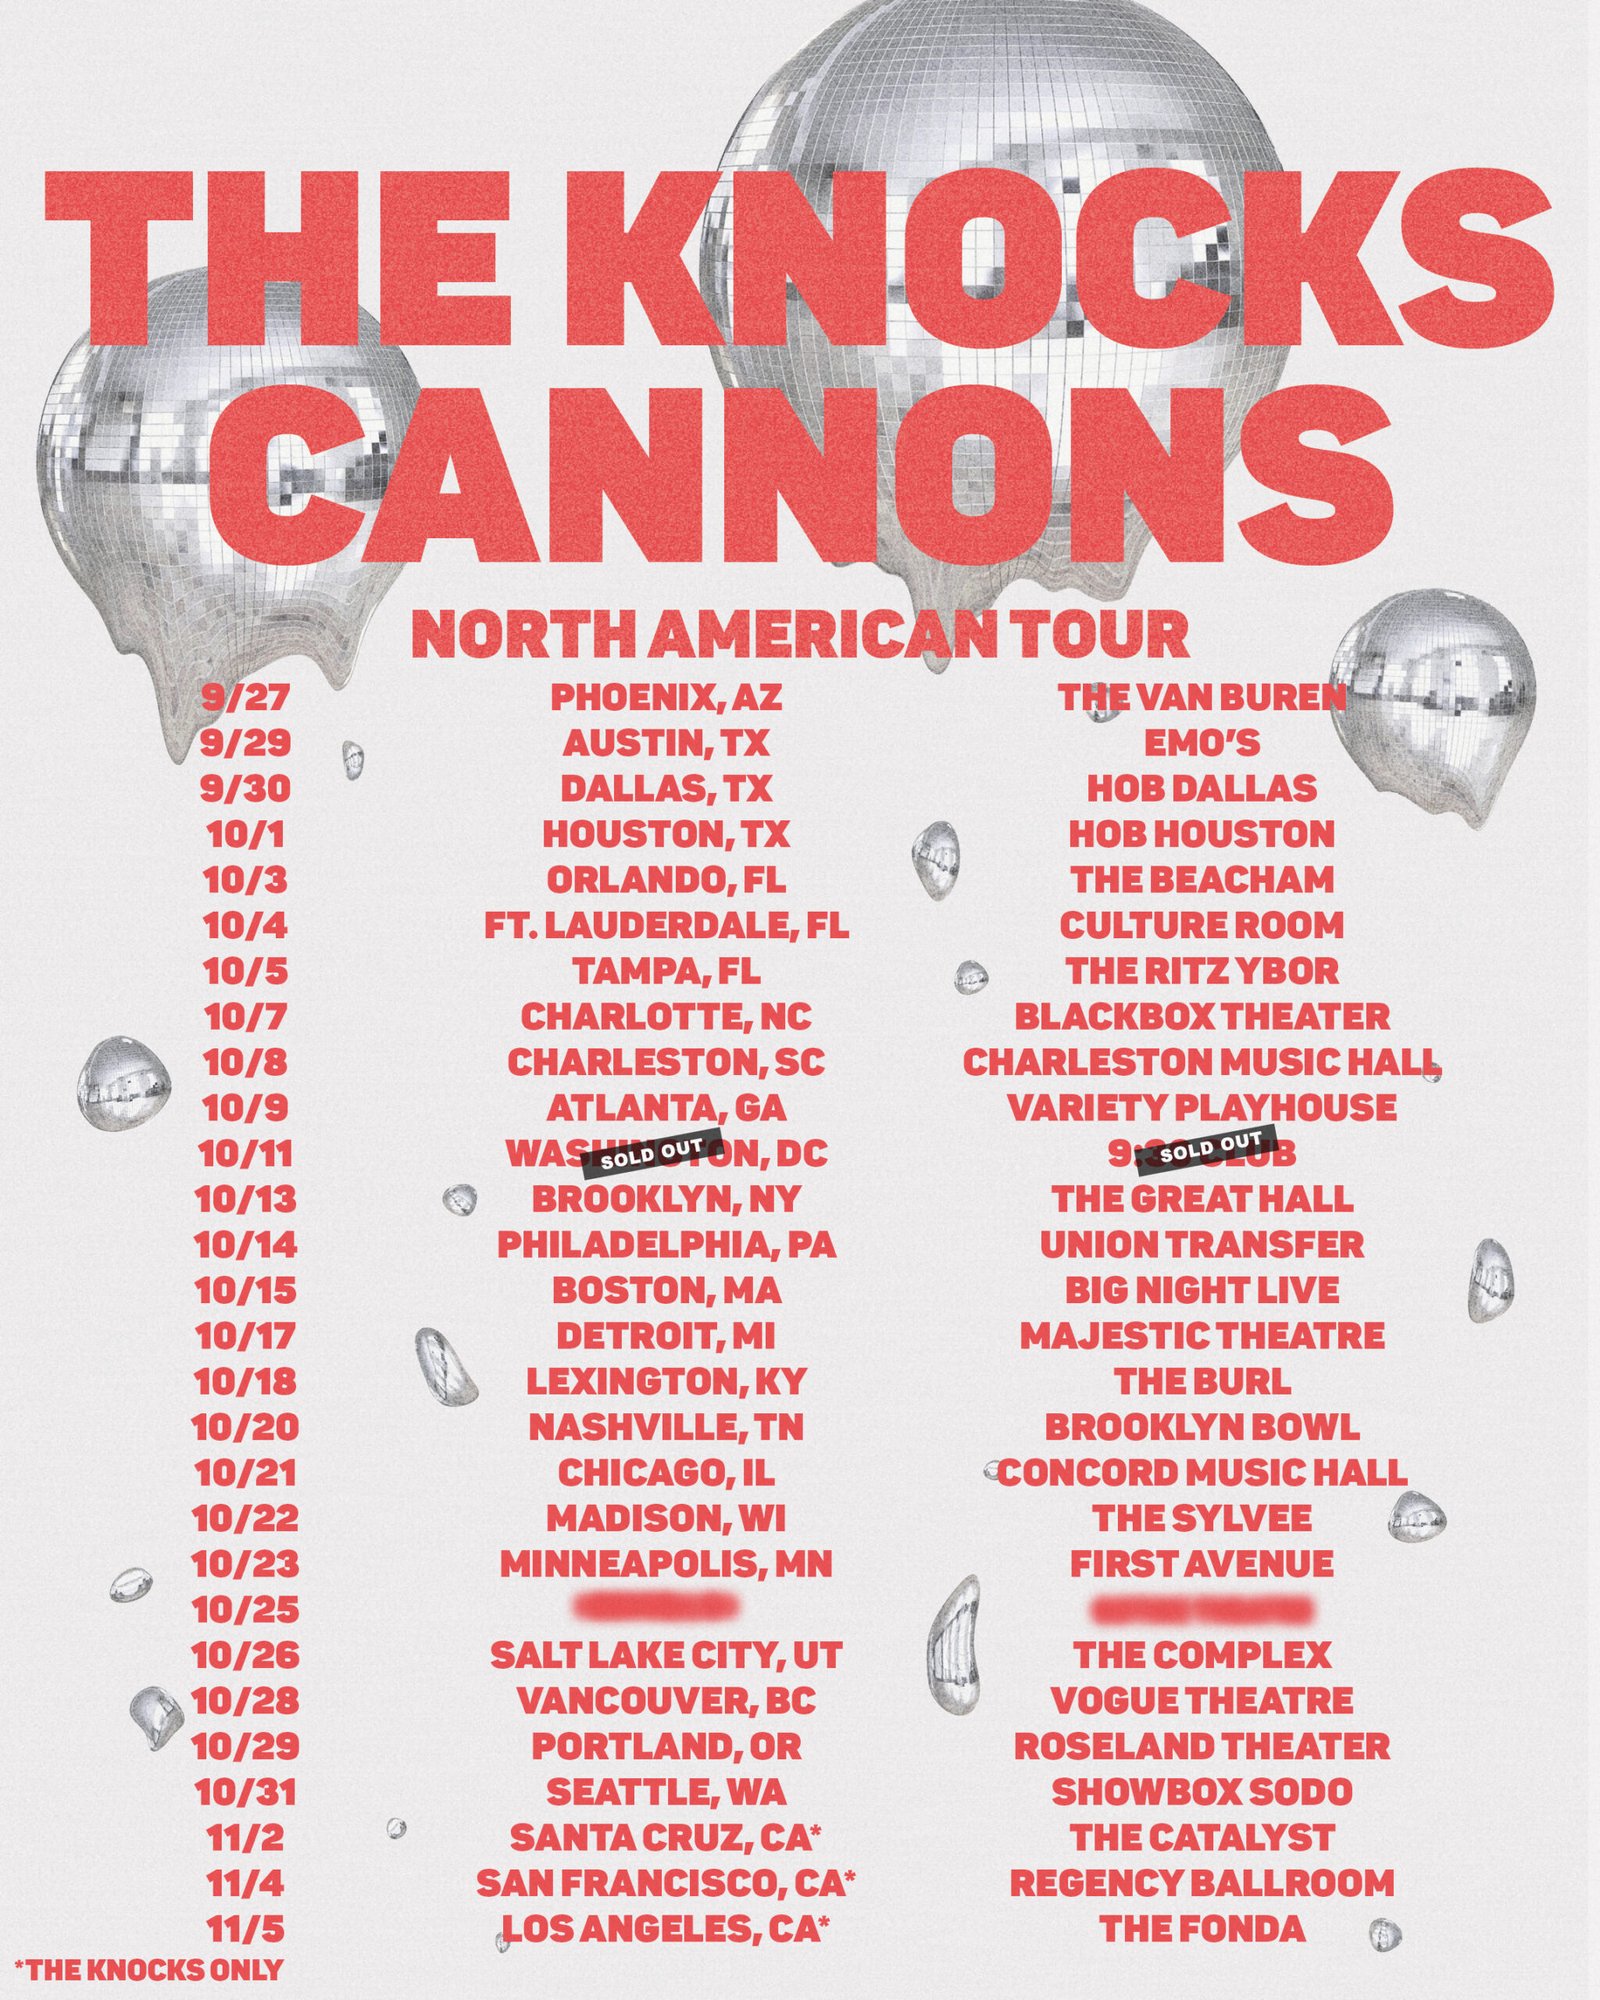 the knocks and cannons tour